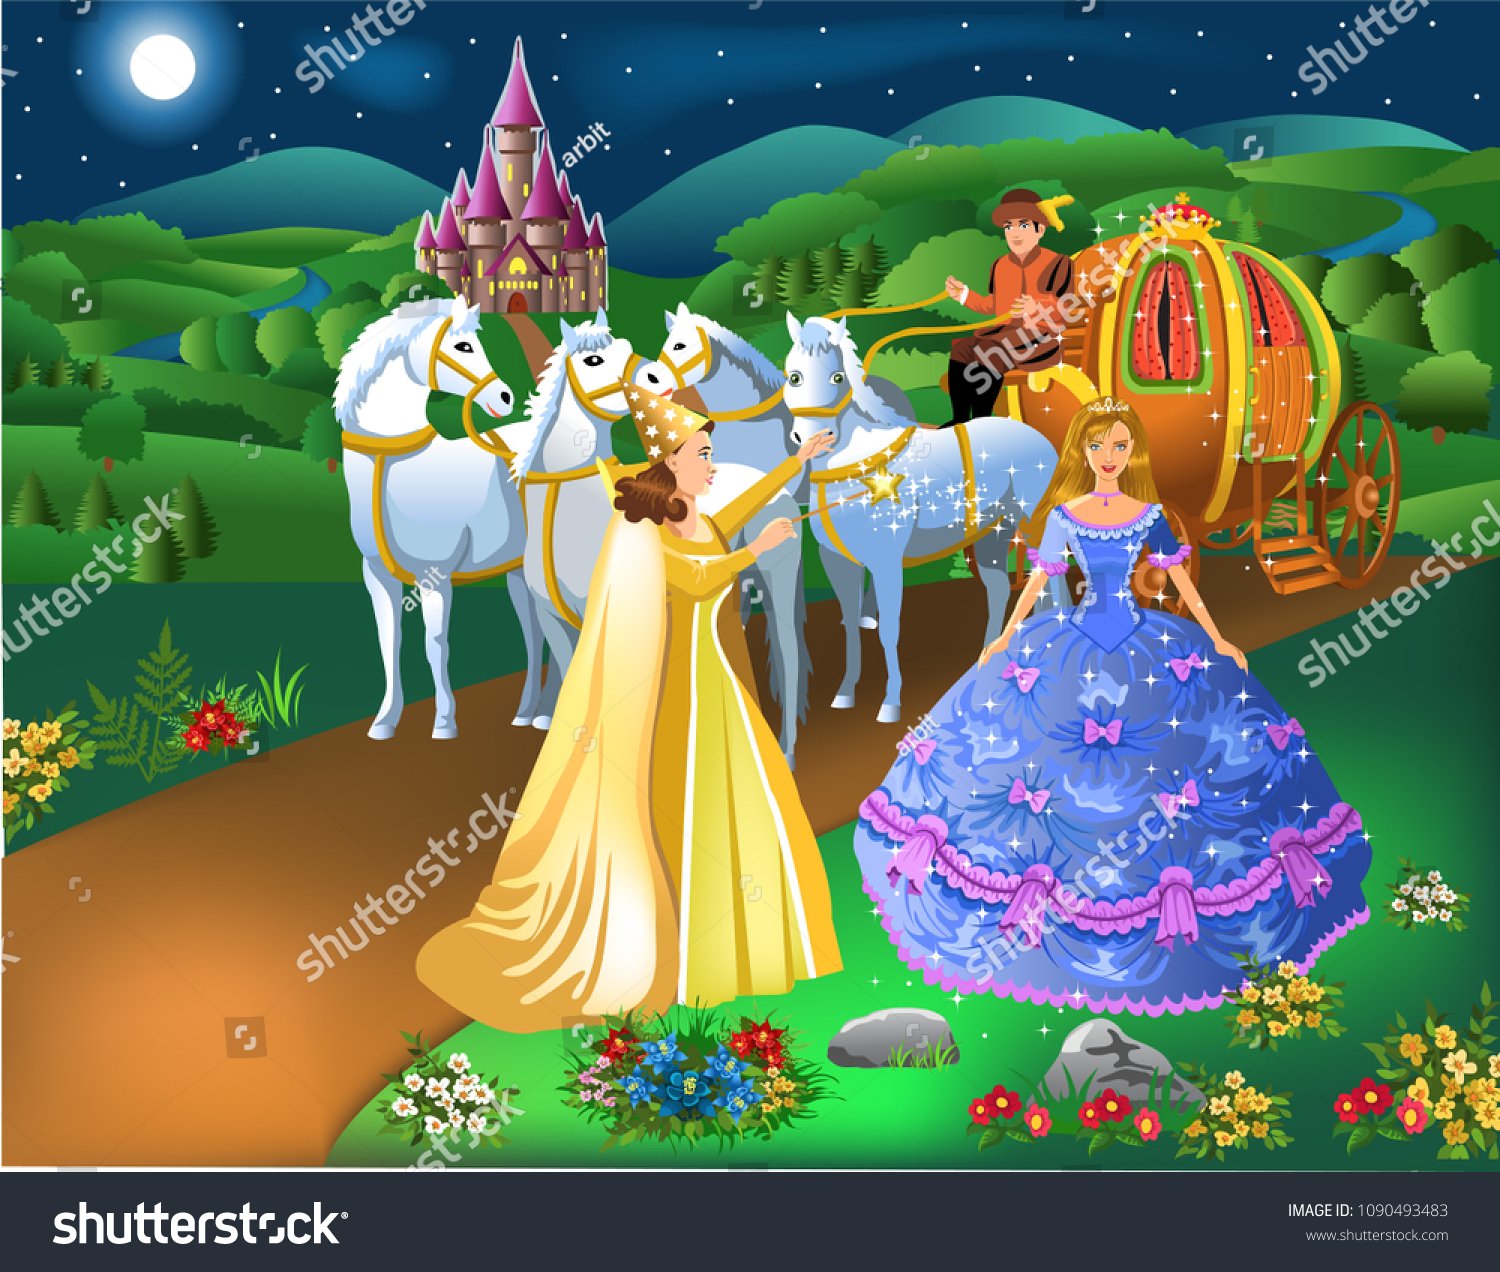 SVG of Cinderella scene with godmother fairy transforming pumpkin into carriage with horses and the girl into a princess svg